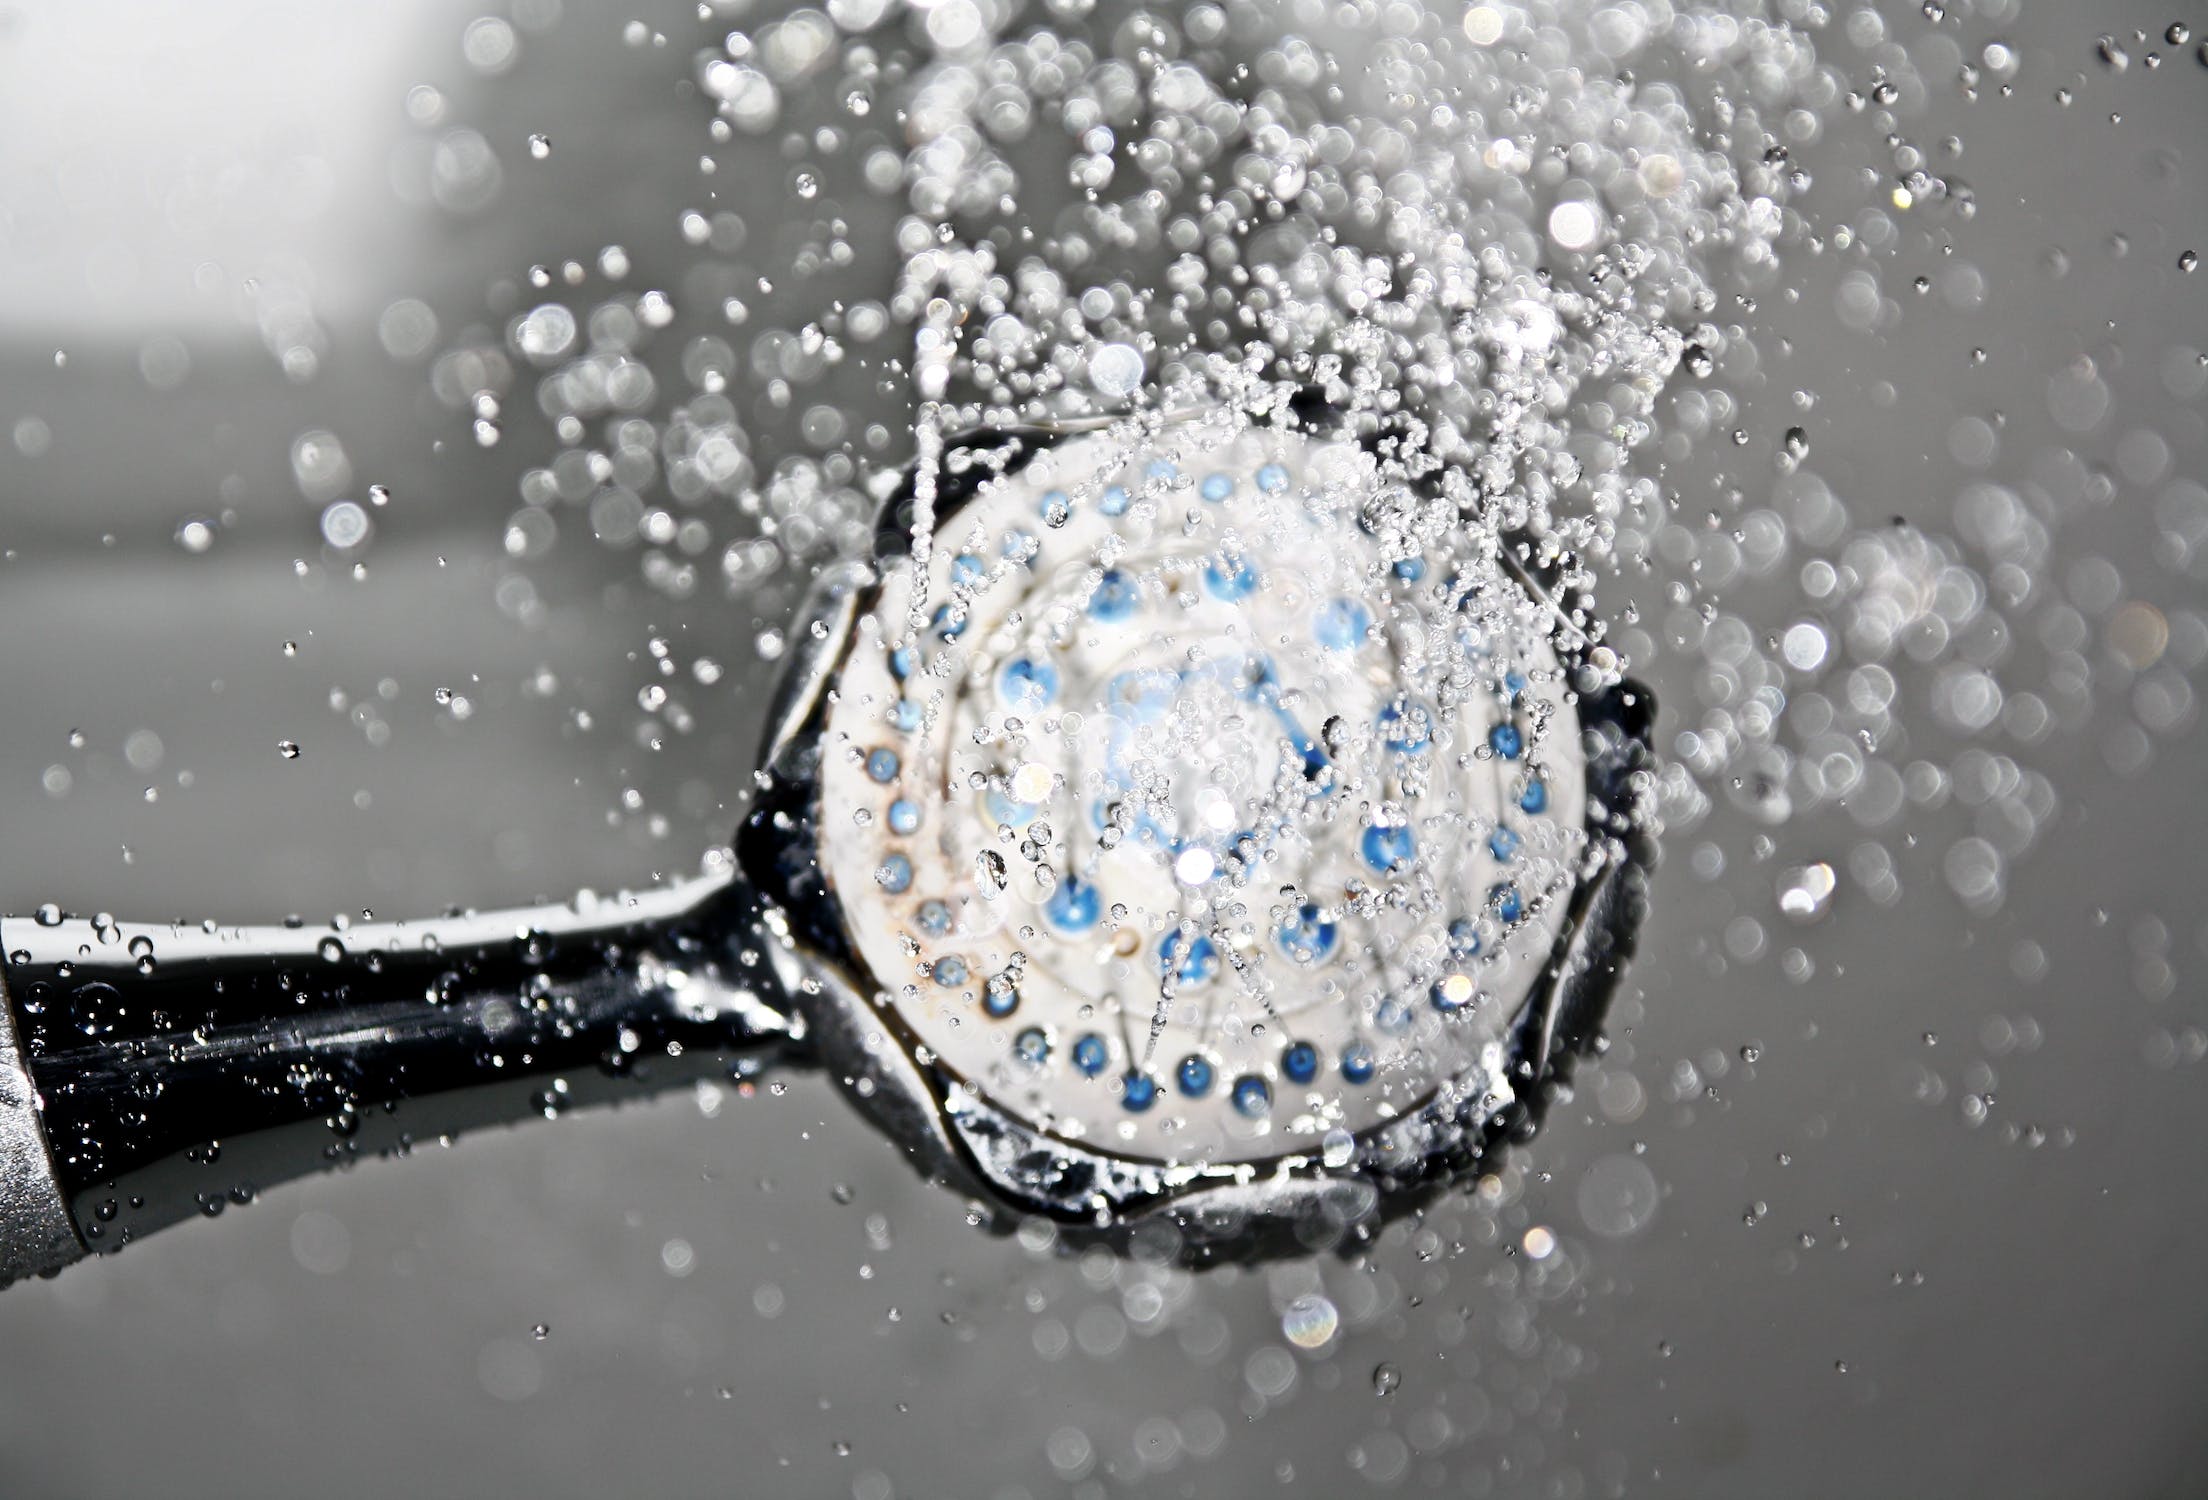 Save Water & Time: 4 Tips To Make Your Daily Routine More Sustainable